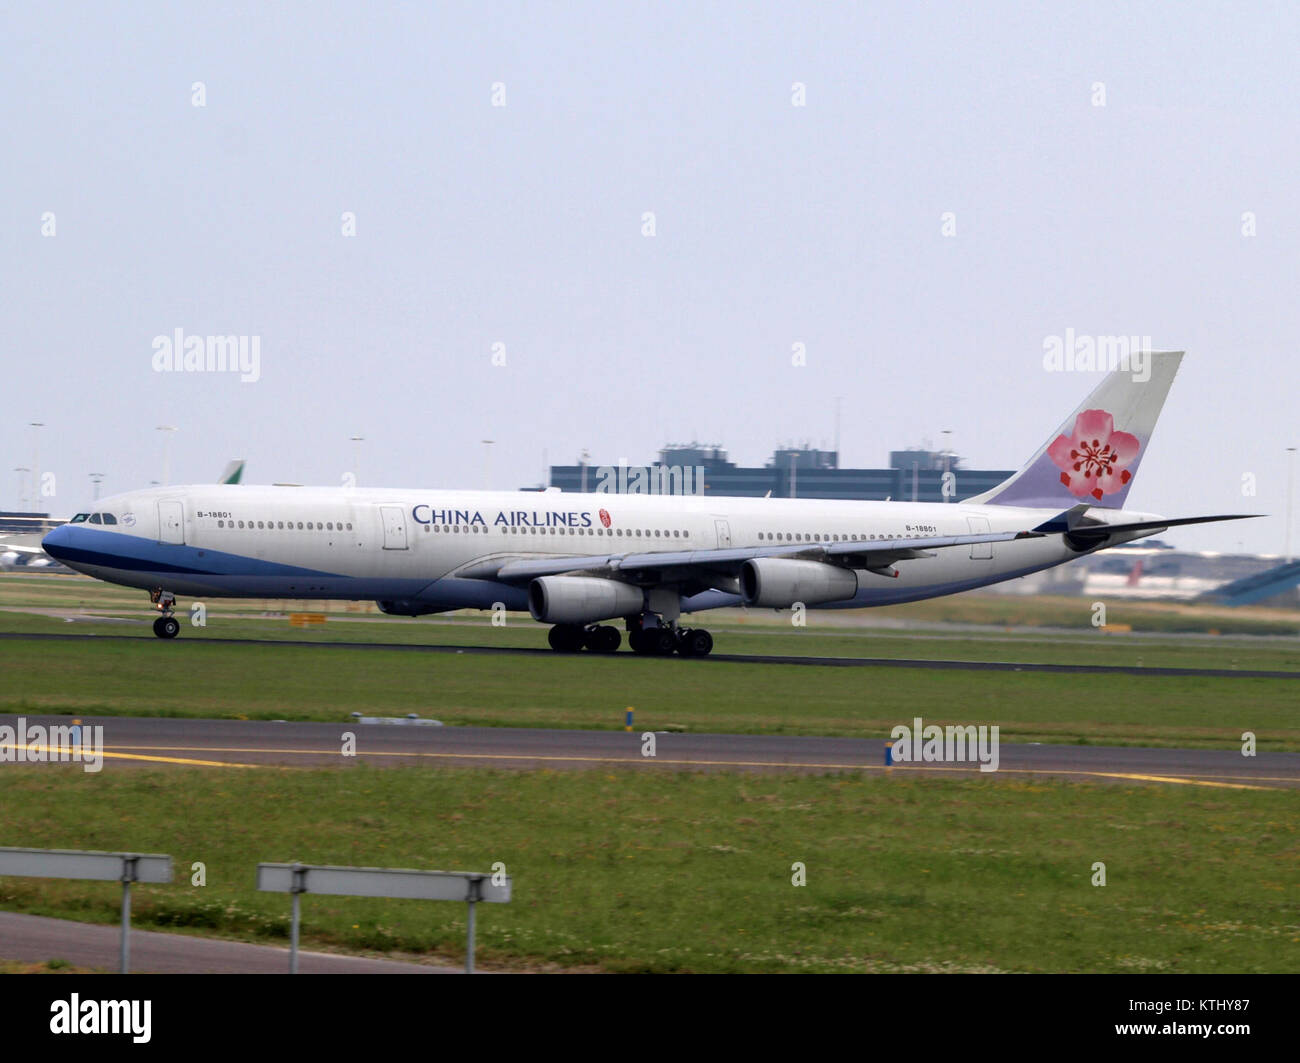 B 18801 China Airlines Airbus A340 313X   cn 402 pic1 Stock Photo